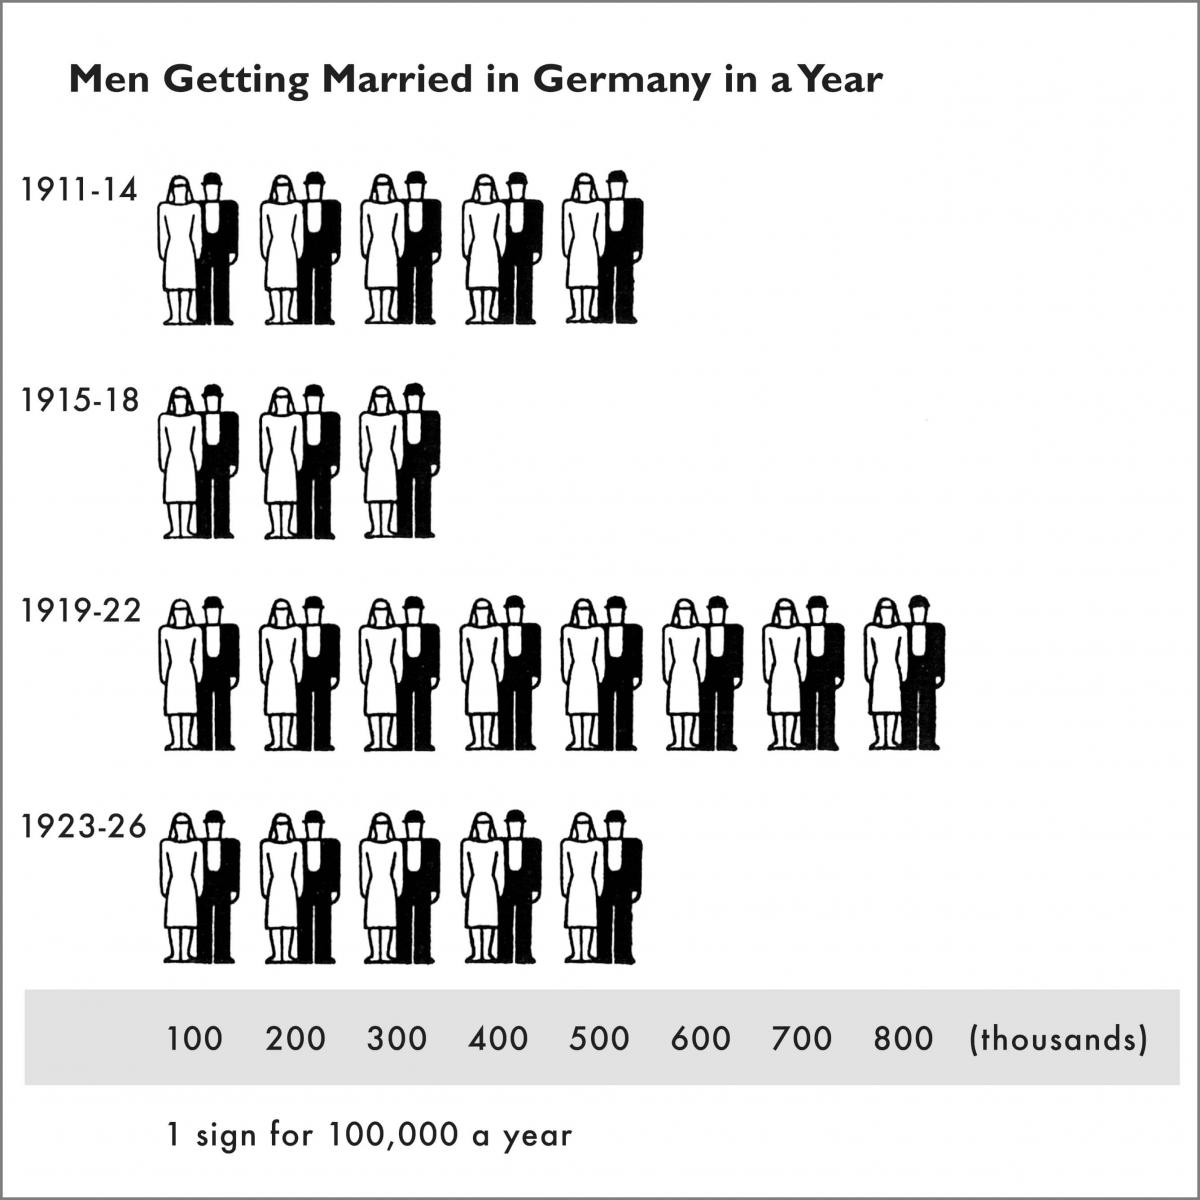 Chart about marriages in Germany